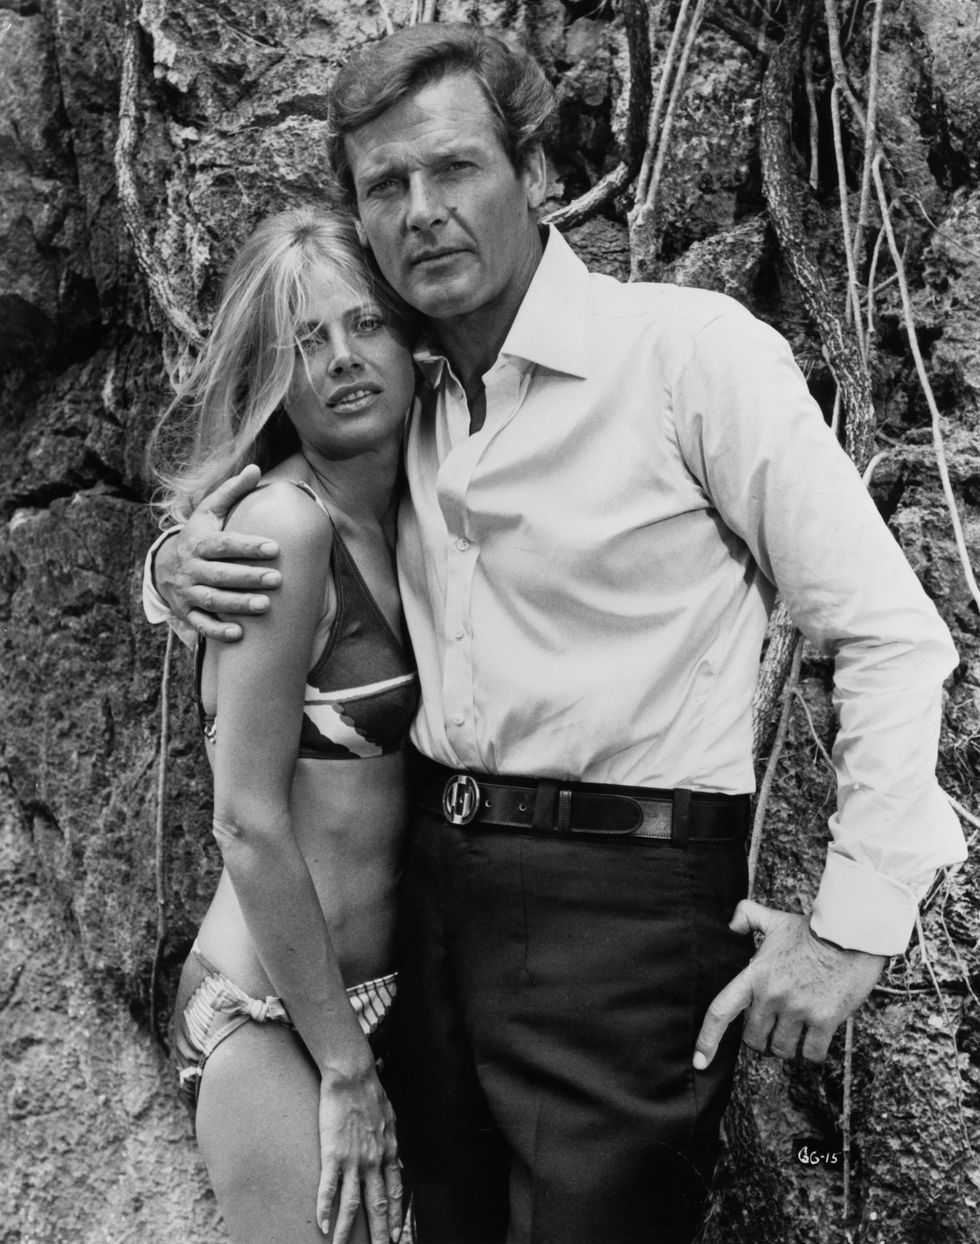 roger moore with his arm around britt ekland, wearing a bikini in a scene from the film 'the man with the golden gun', 1974 photo by united artistsgetty images